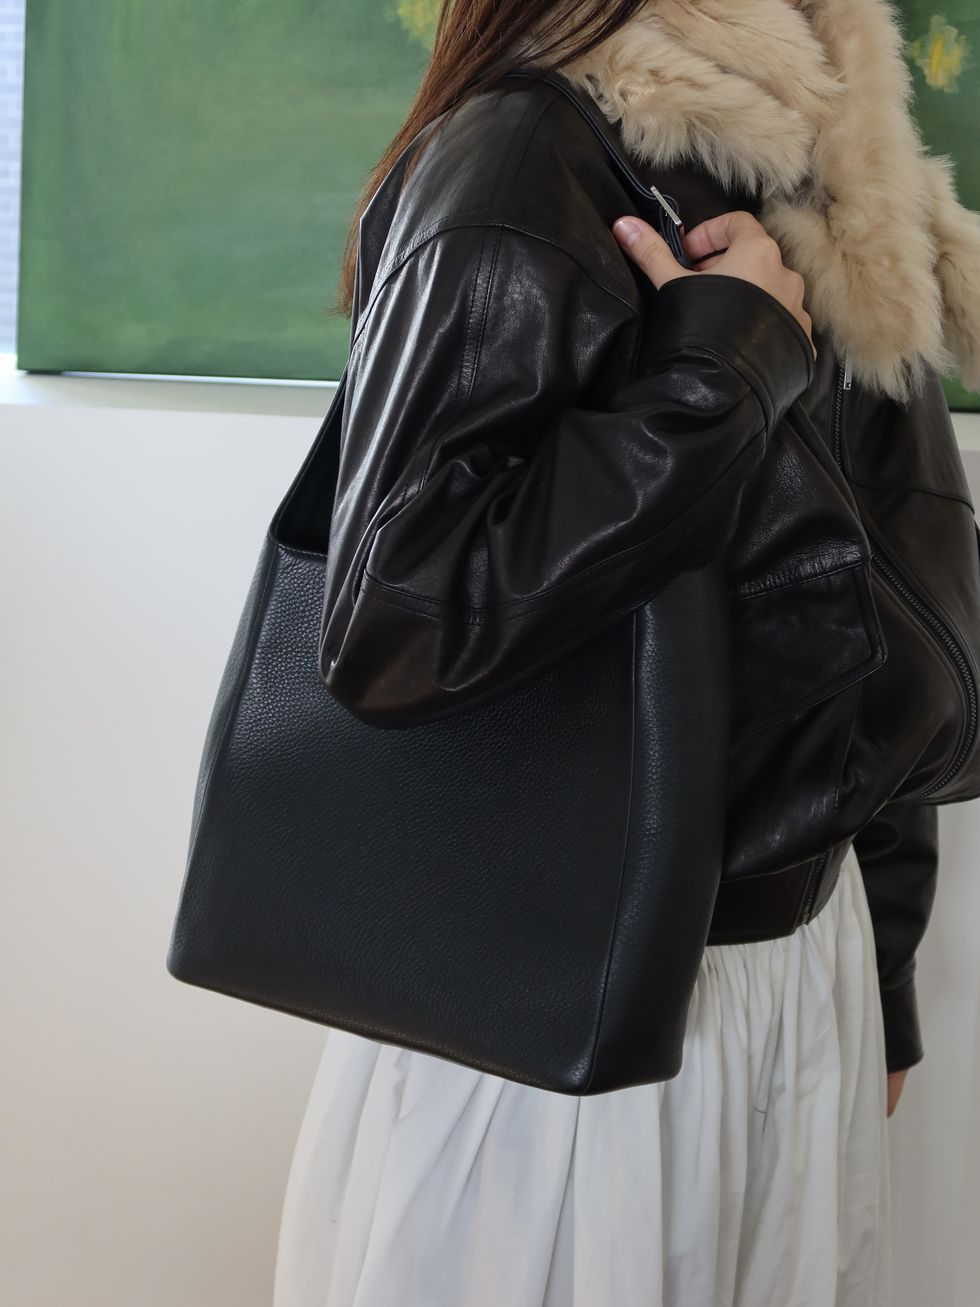 a person holding a black bag